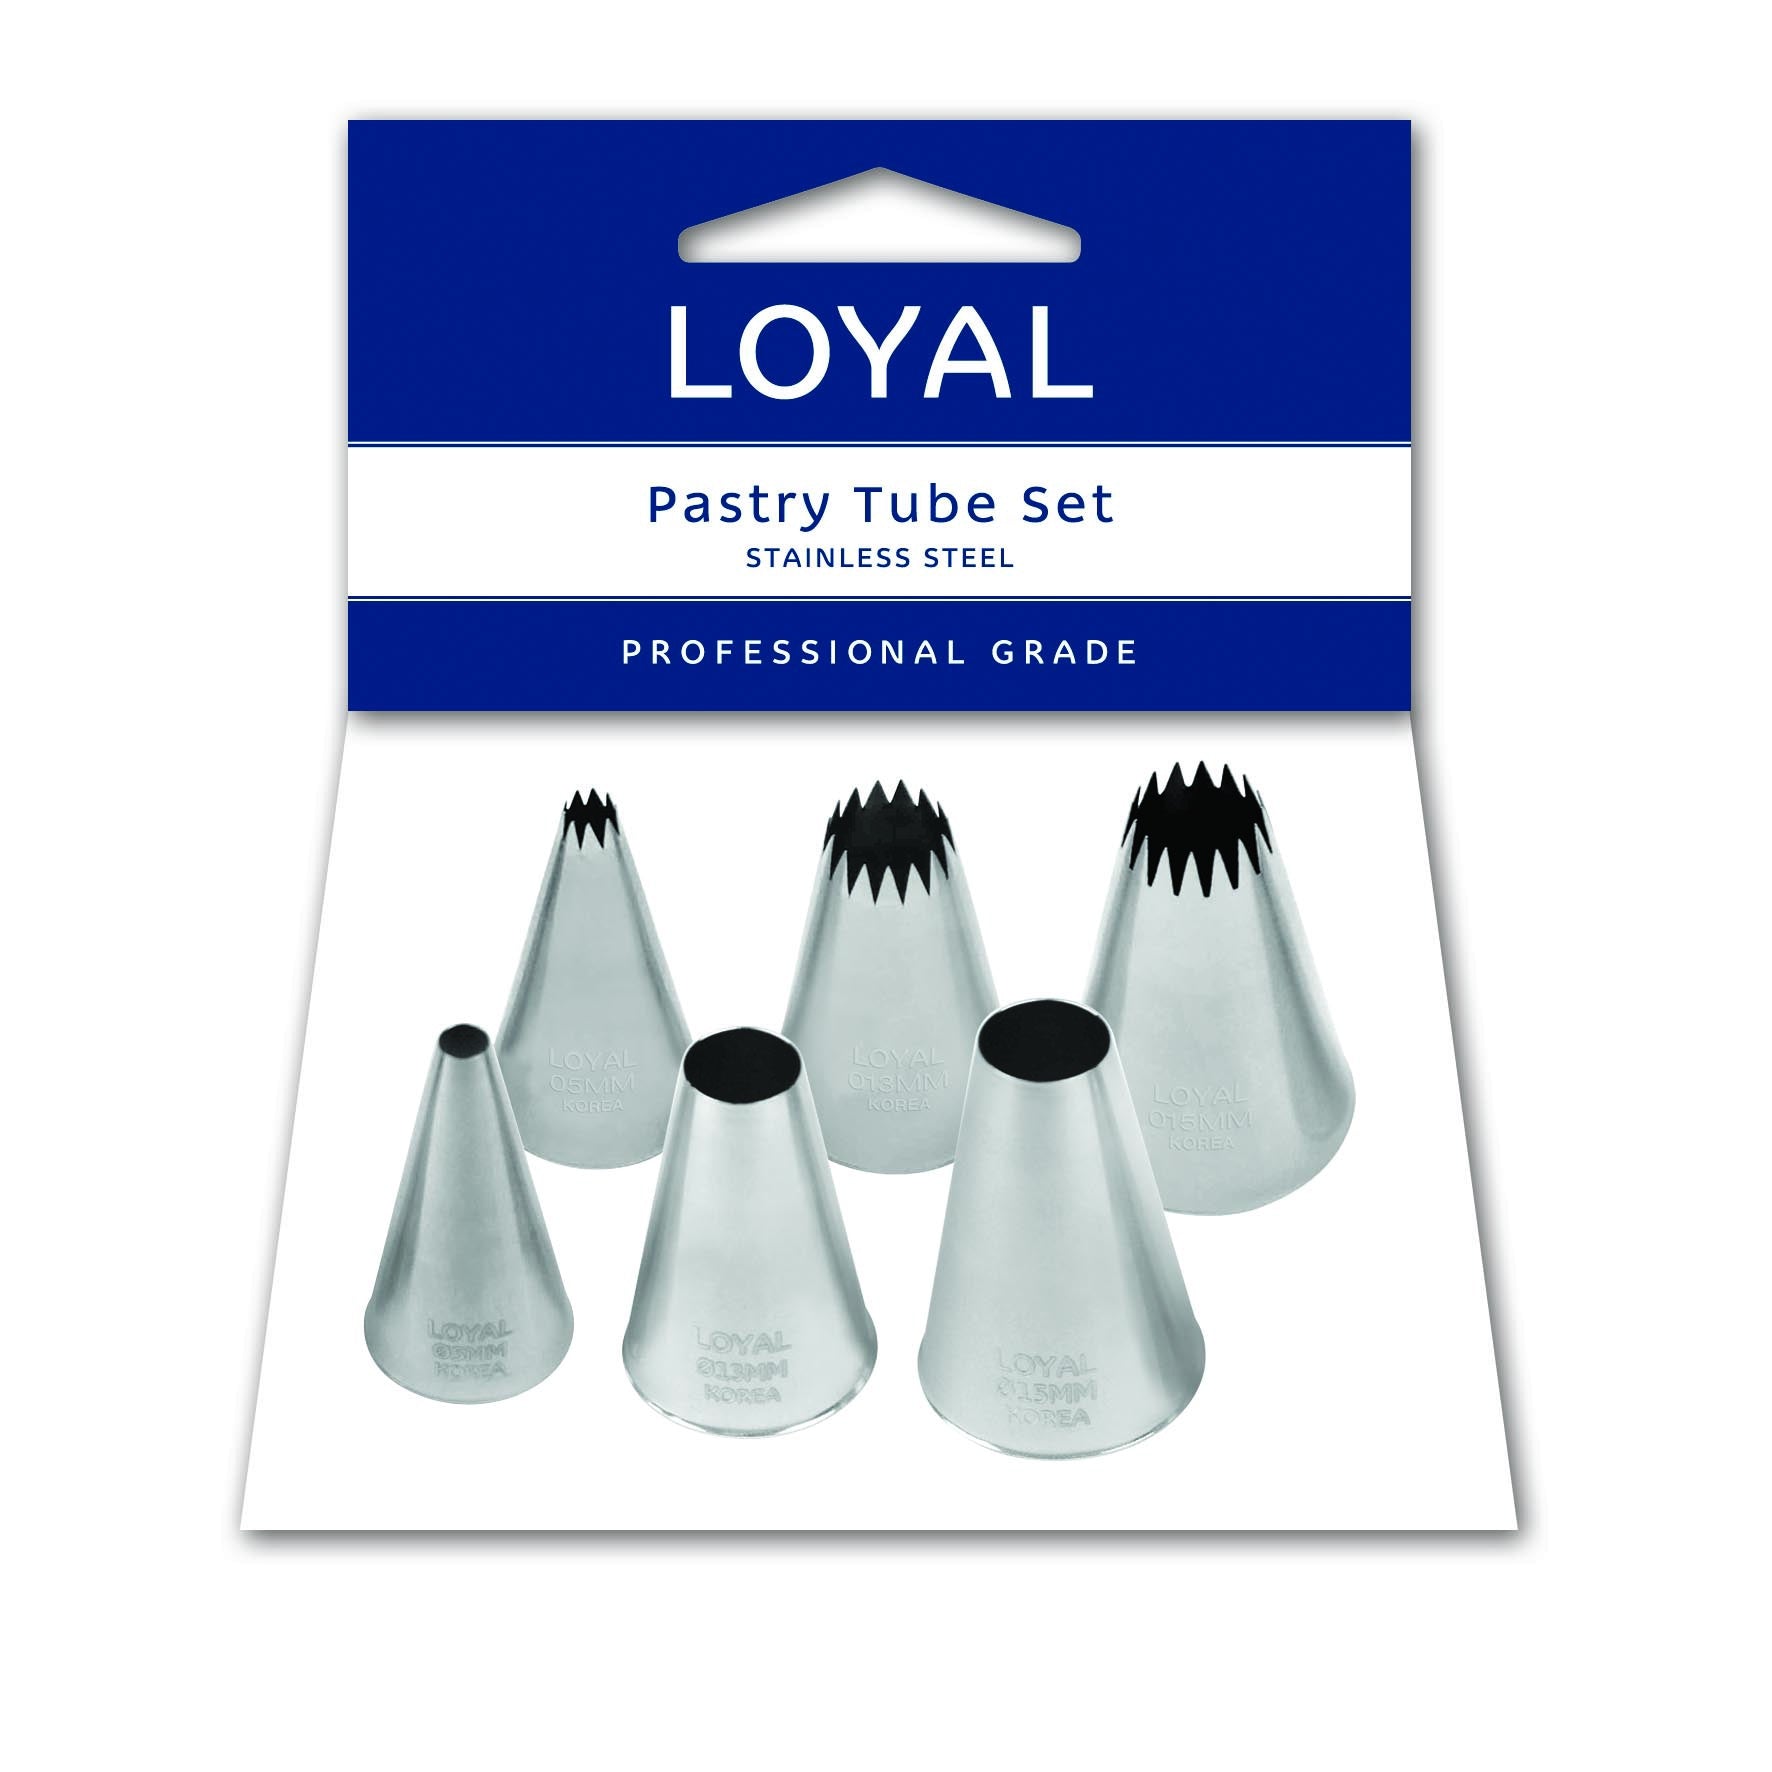 Loyal French Star and Round Set - 6